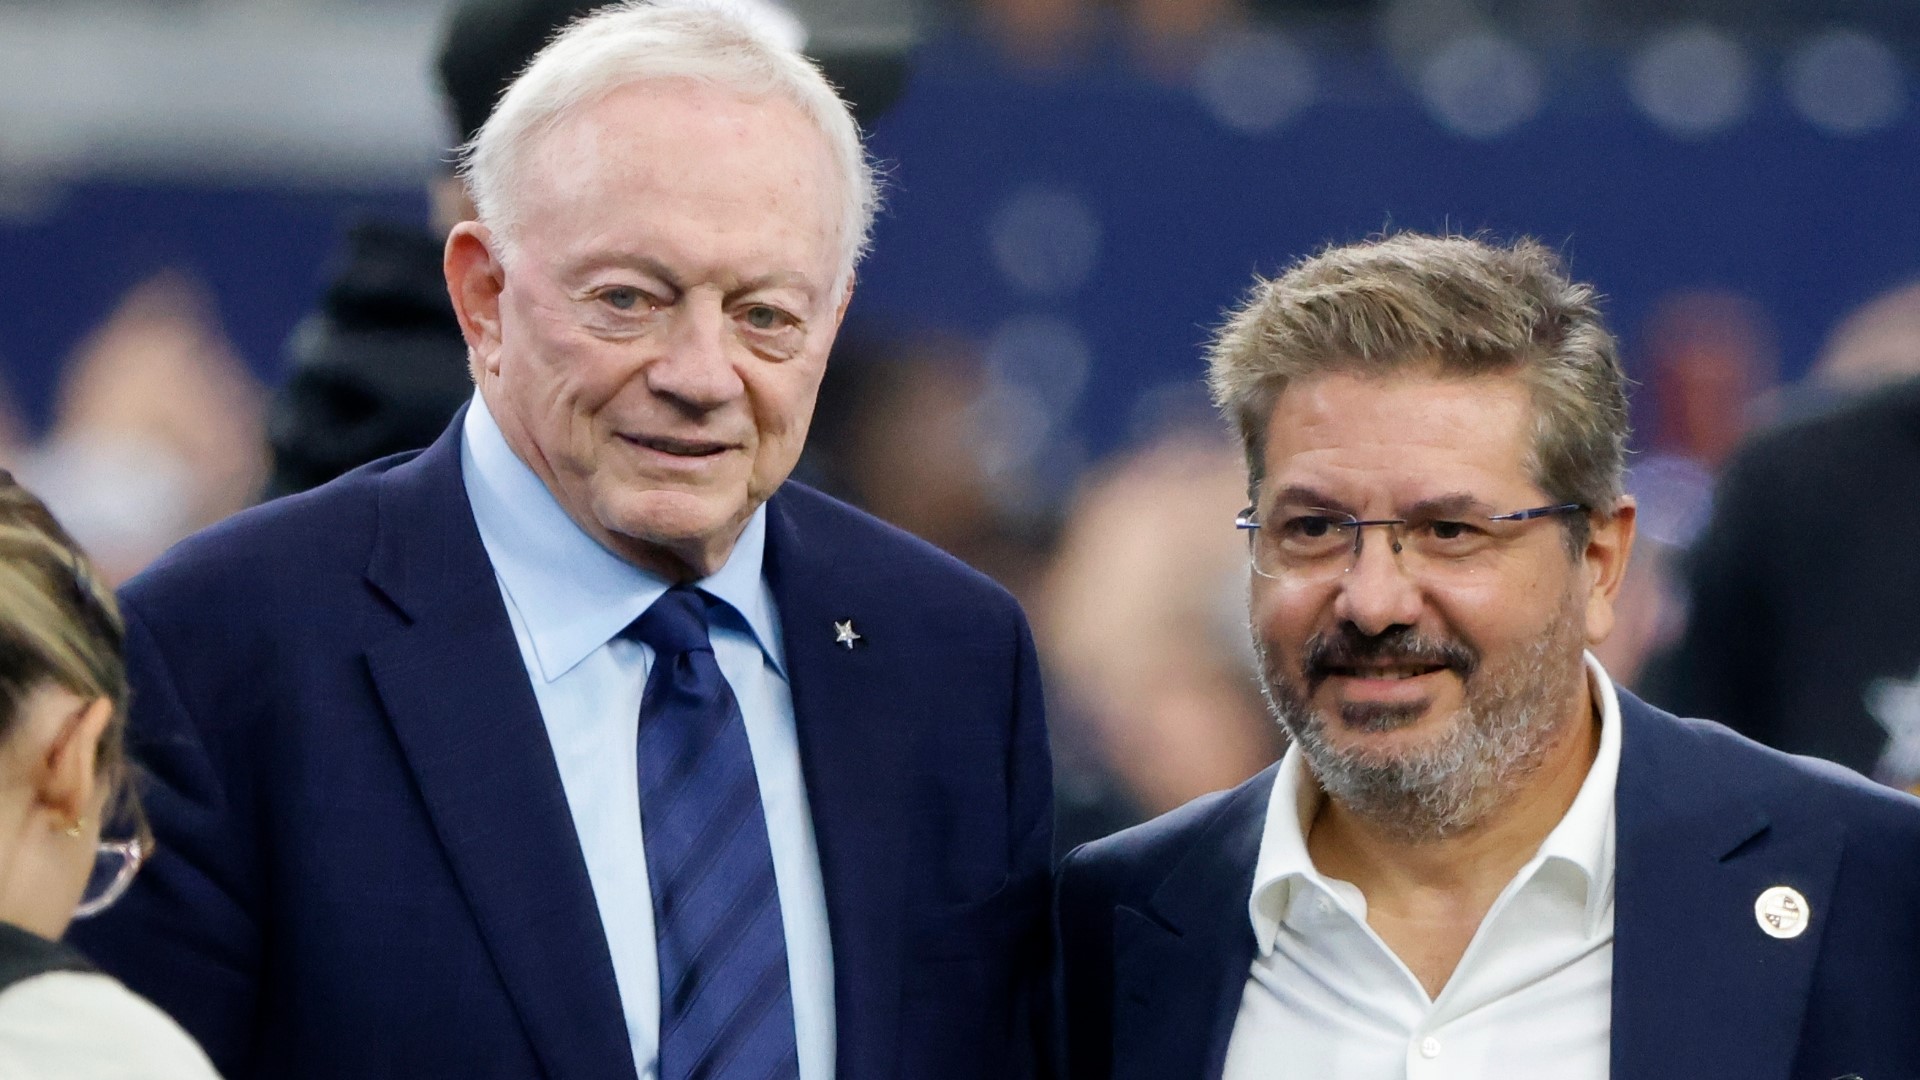 While speaking with reporters Tuesday, Colts Owner Jim Irsay claimed he believes the NFL potentially has the votes to remove Snyder from owning the Commanders.